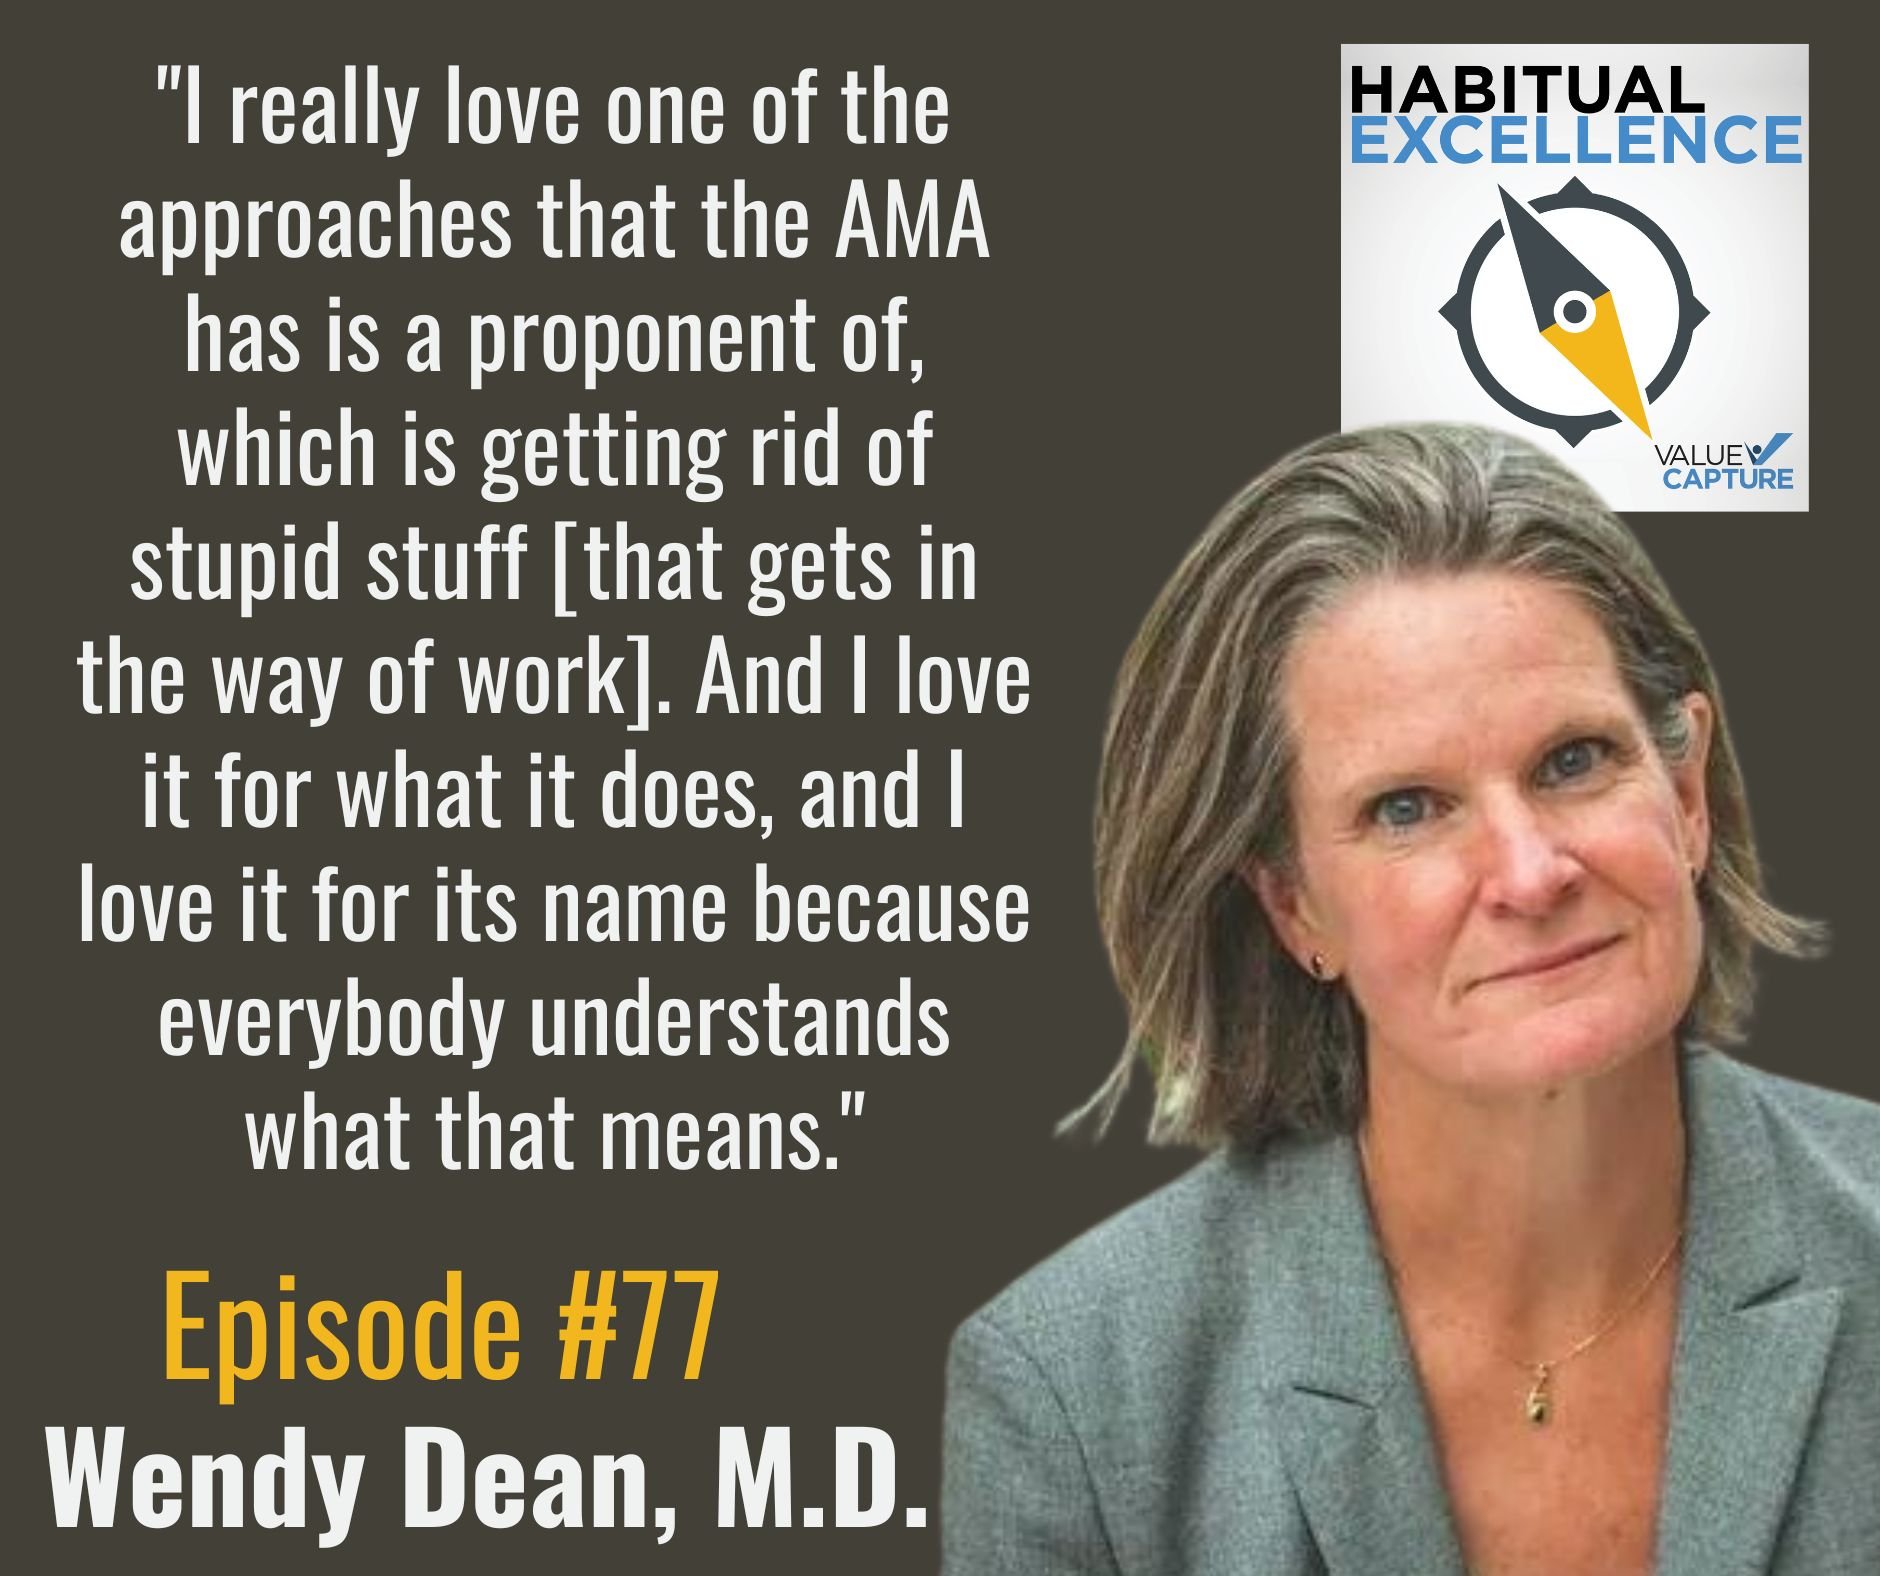 "I really love one of the approaches that the AMA has is a proponent of, which is getting rid of stupid stuff [that gets in the way of work]. And I love it for what it does, and I love it for its name because everybody understands what that means." Dr. Wendy Dean